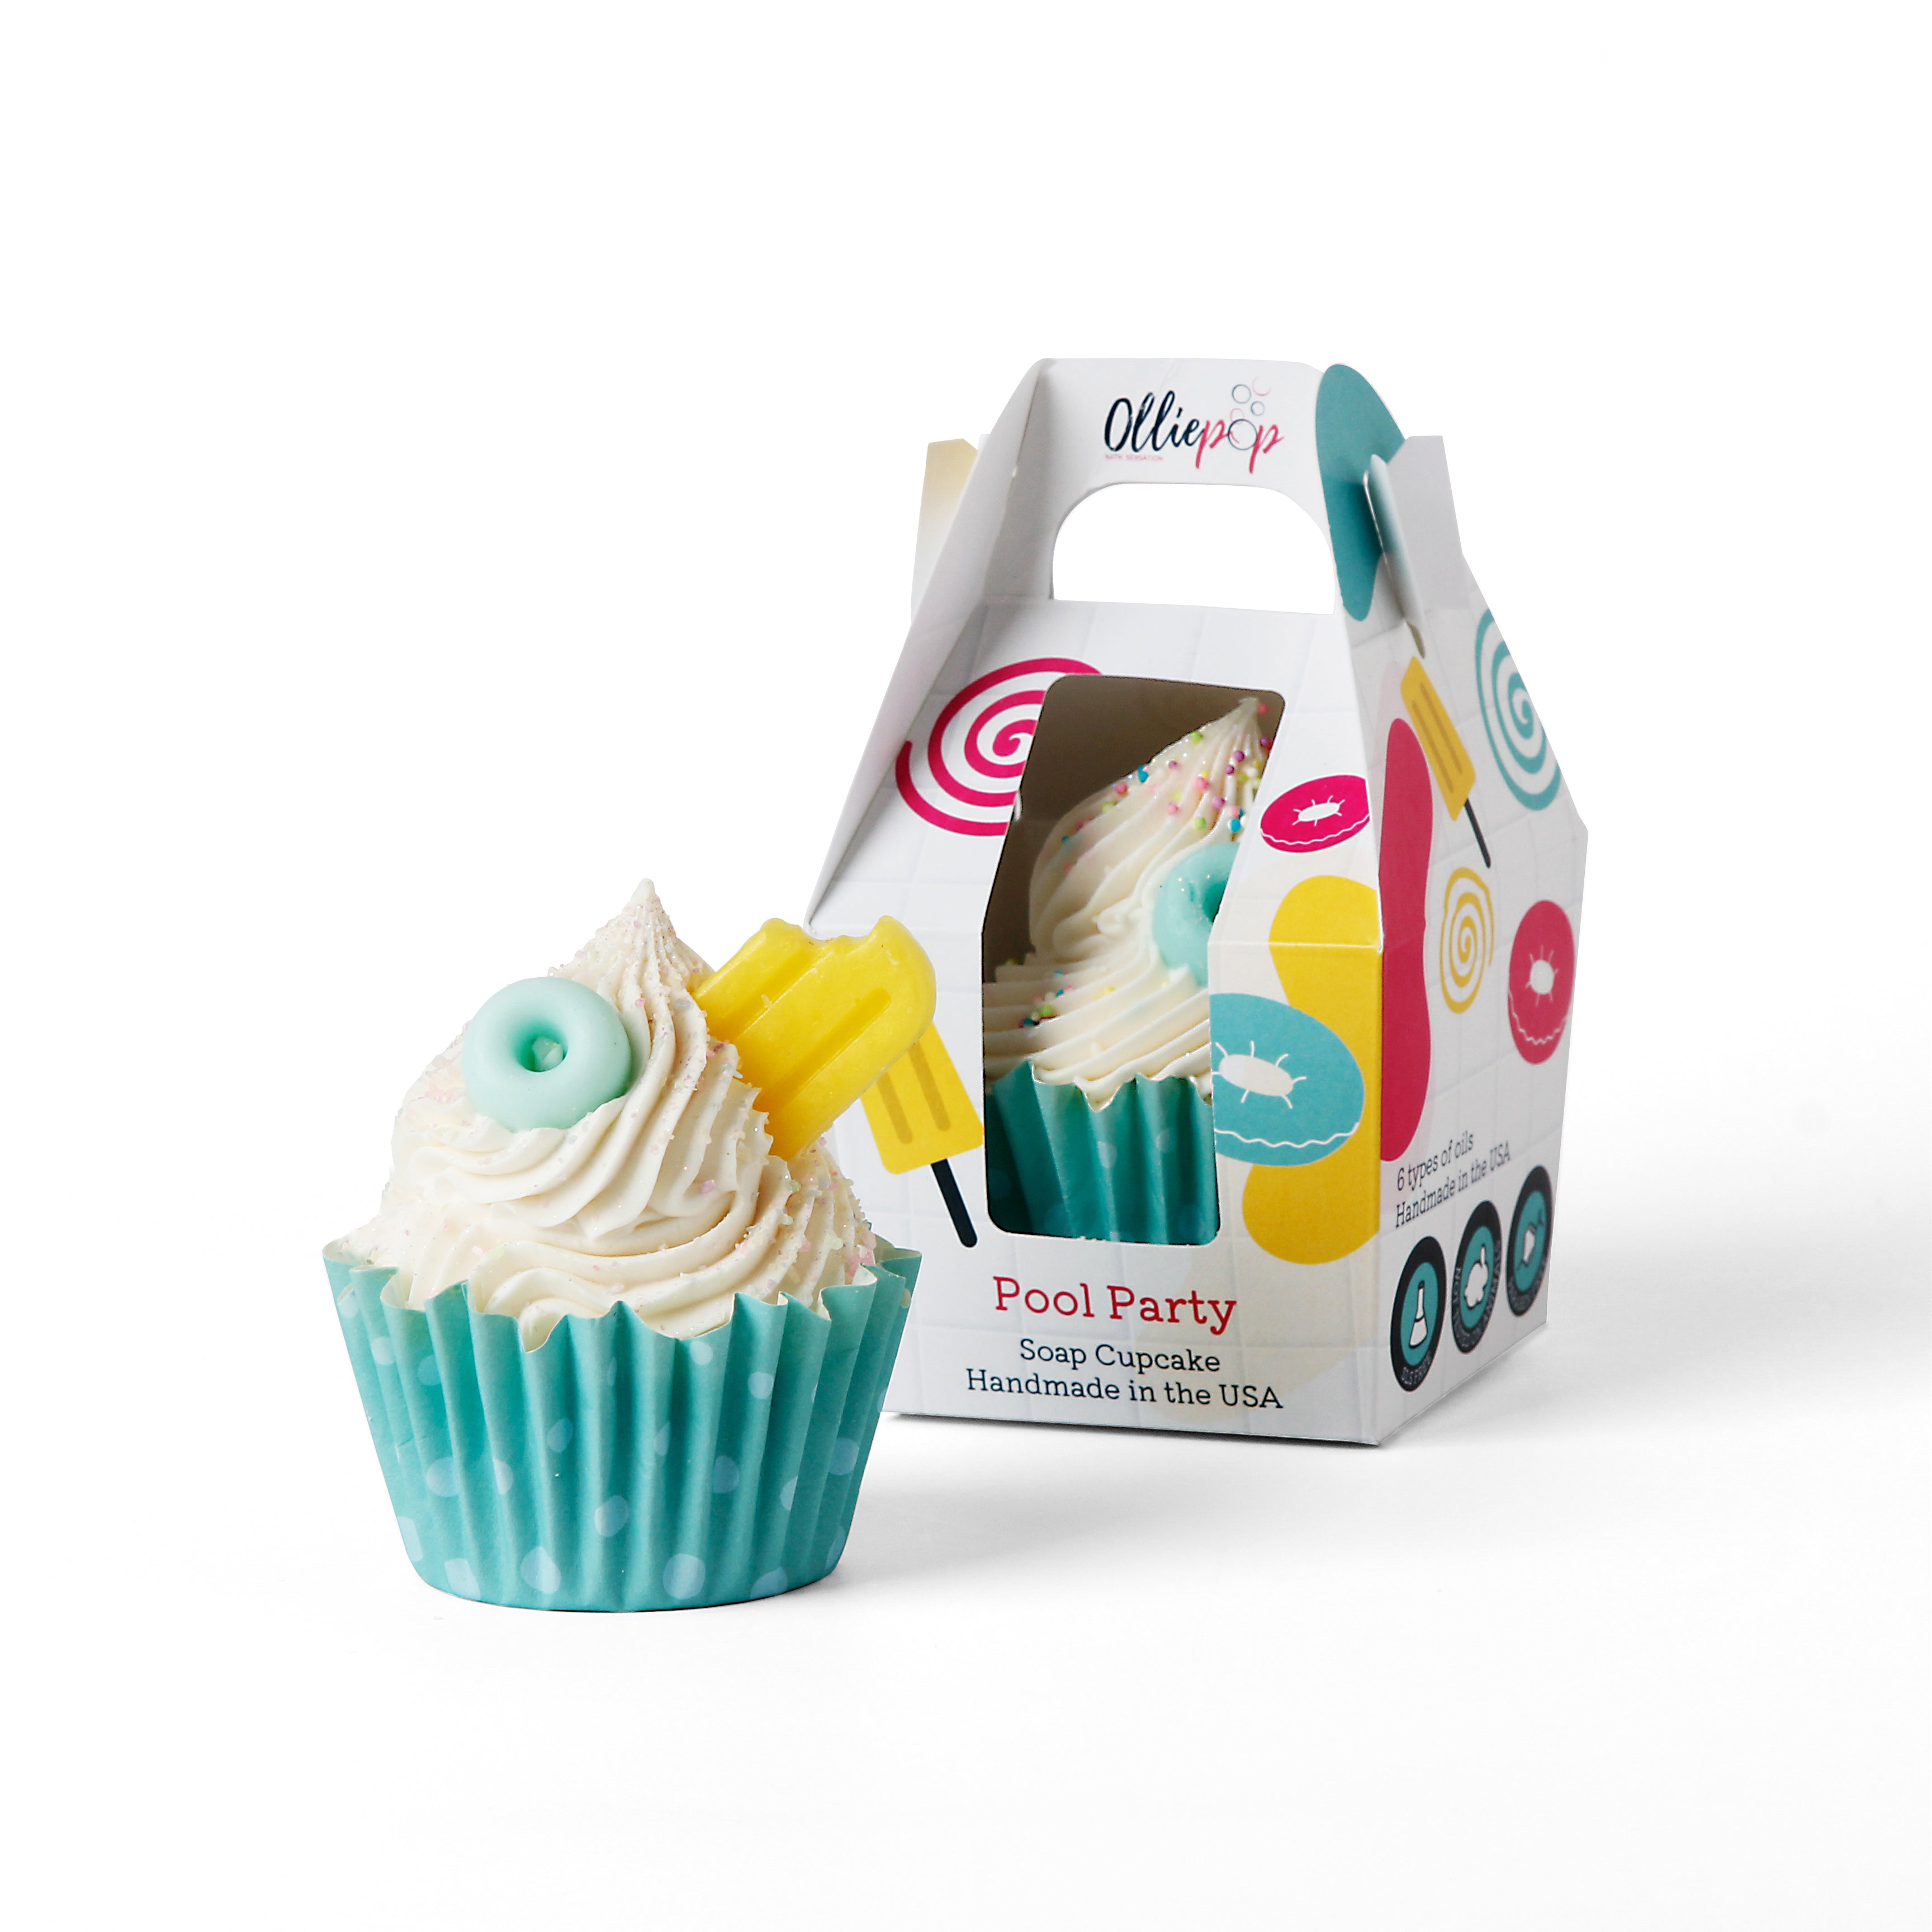 Pool themed soap cupcake, Packaged with our customized Olliepop packaging that is perfect for gifts.